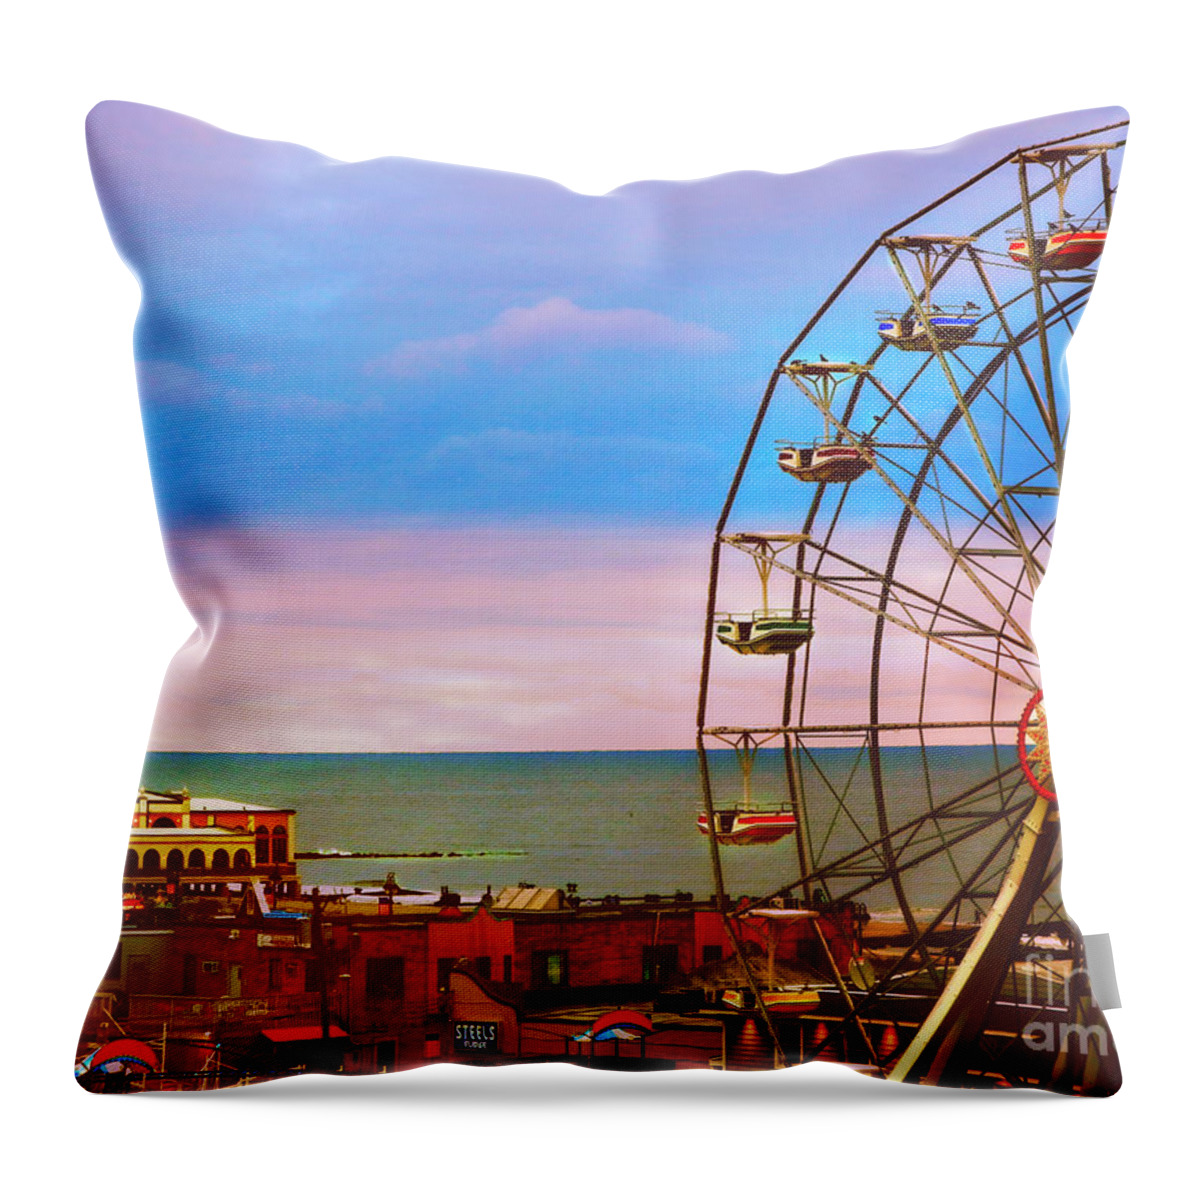 Ocean City Ferris Wheel Throw Pillow featuring the photograph Ocean City New Jersey Ferris Wheel And Music Pier by Beth Ferris Sale